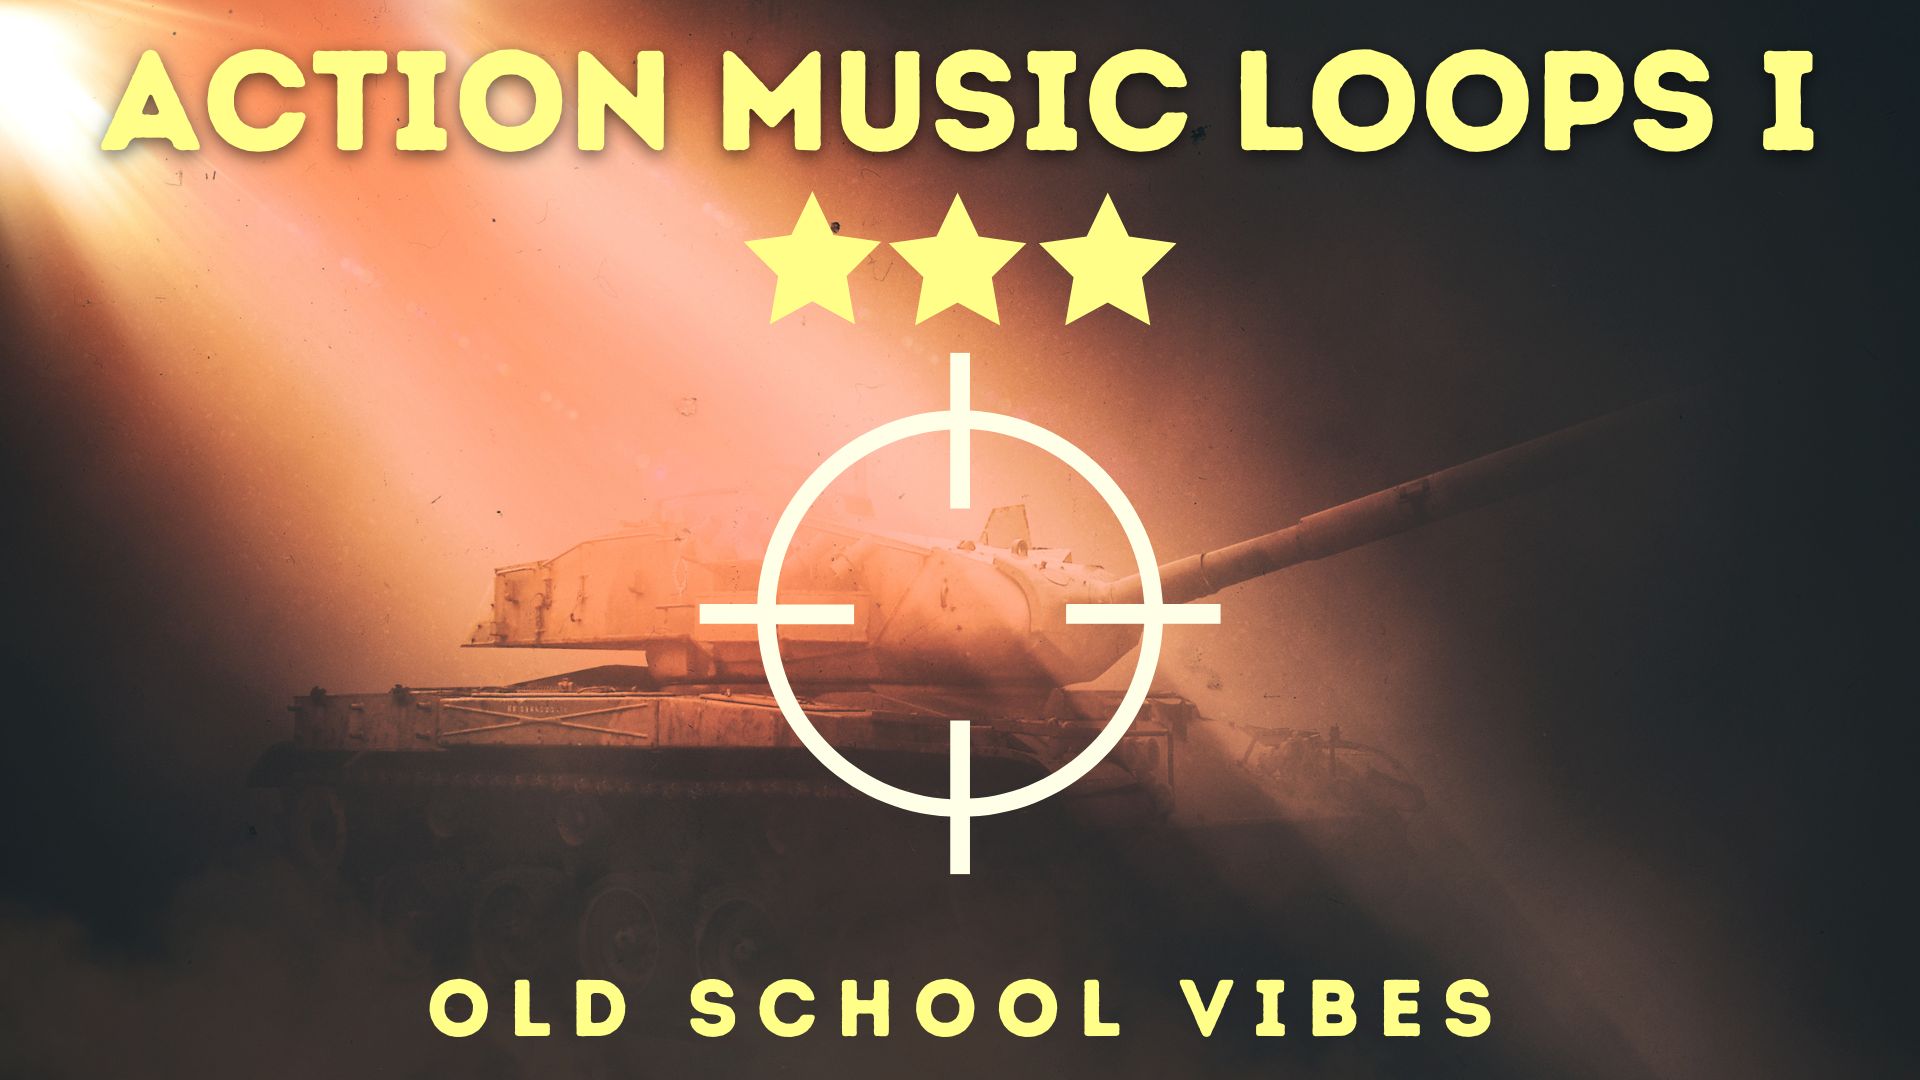 Action Music Loops 1: Old School Vibes